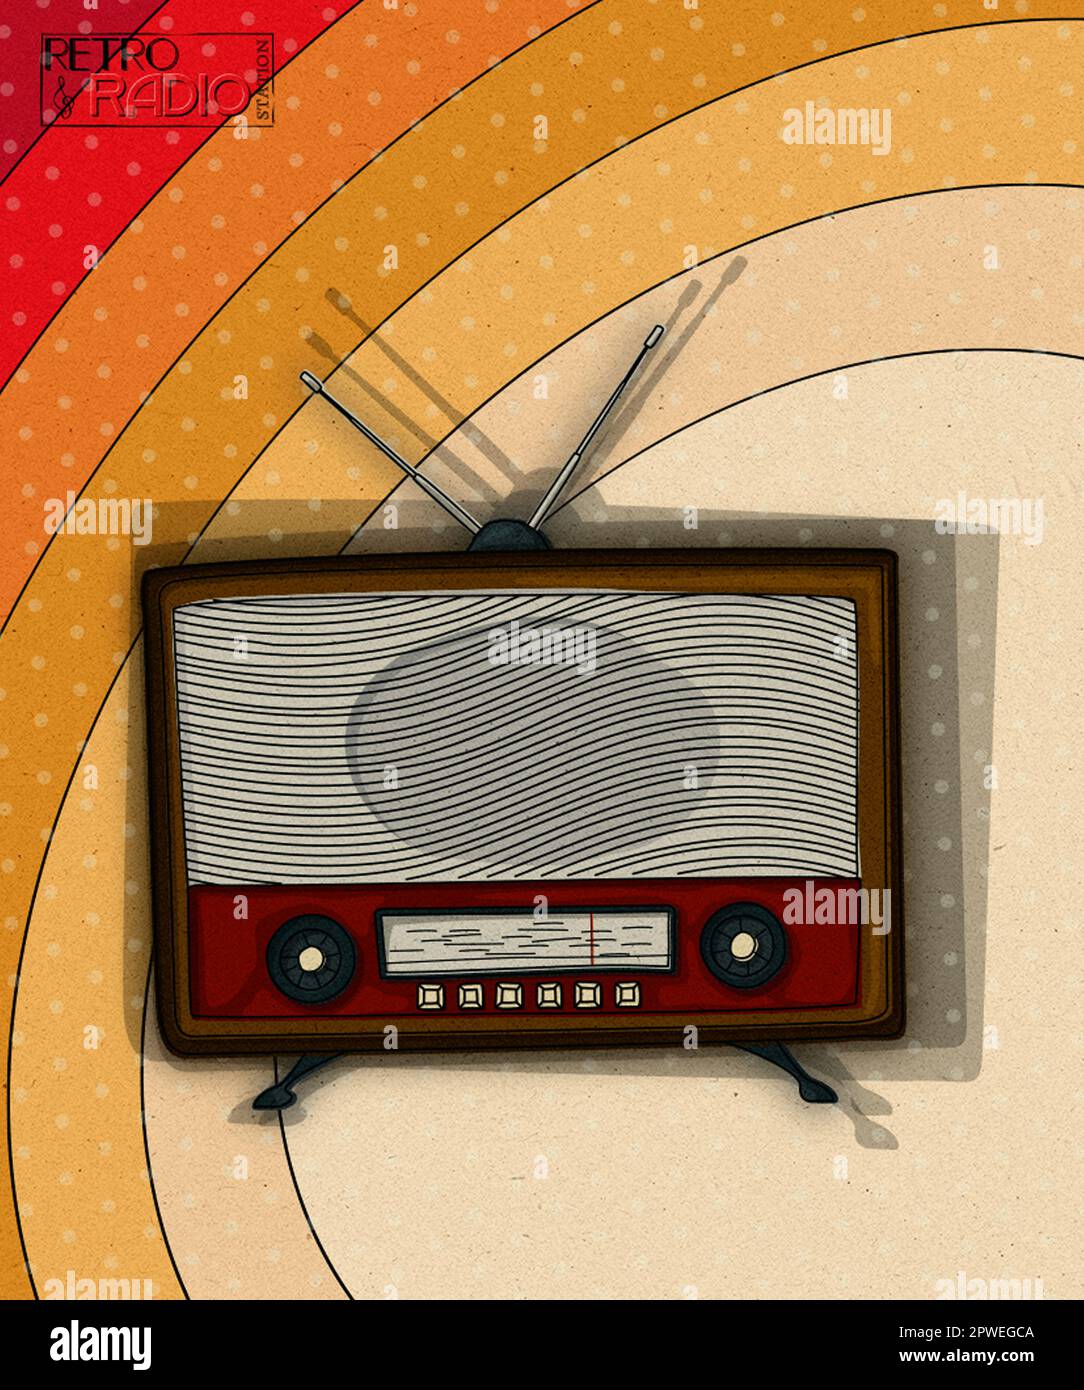 Retro radio background template design with vintage radio and room for text  Stock Photo - Alamy